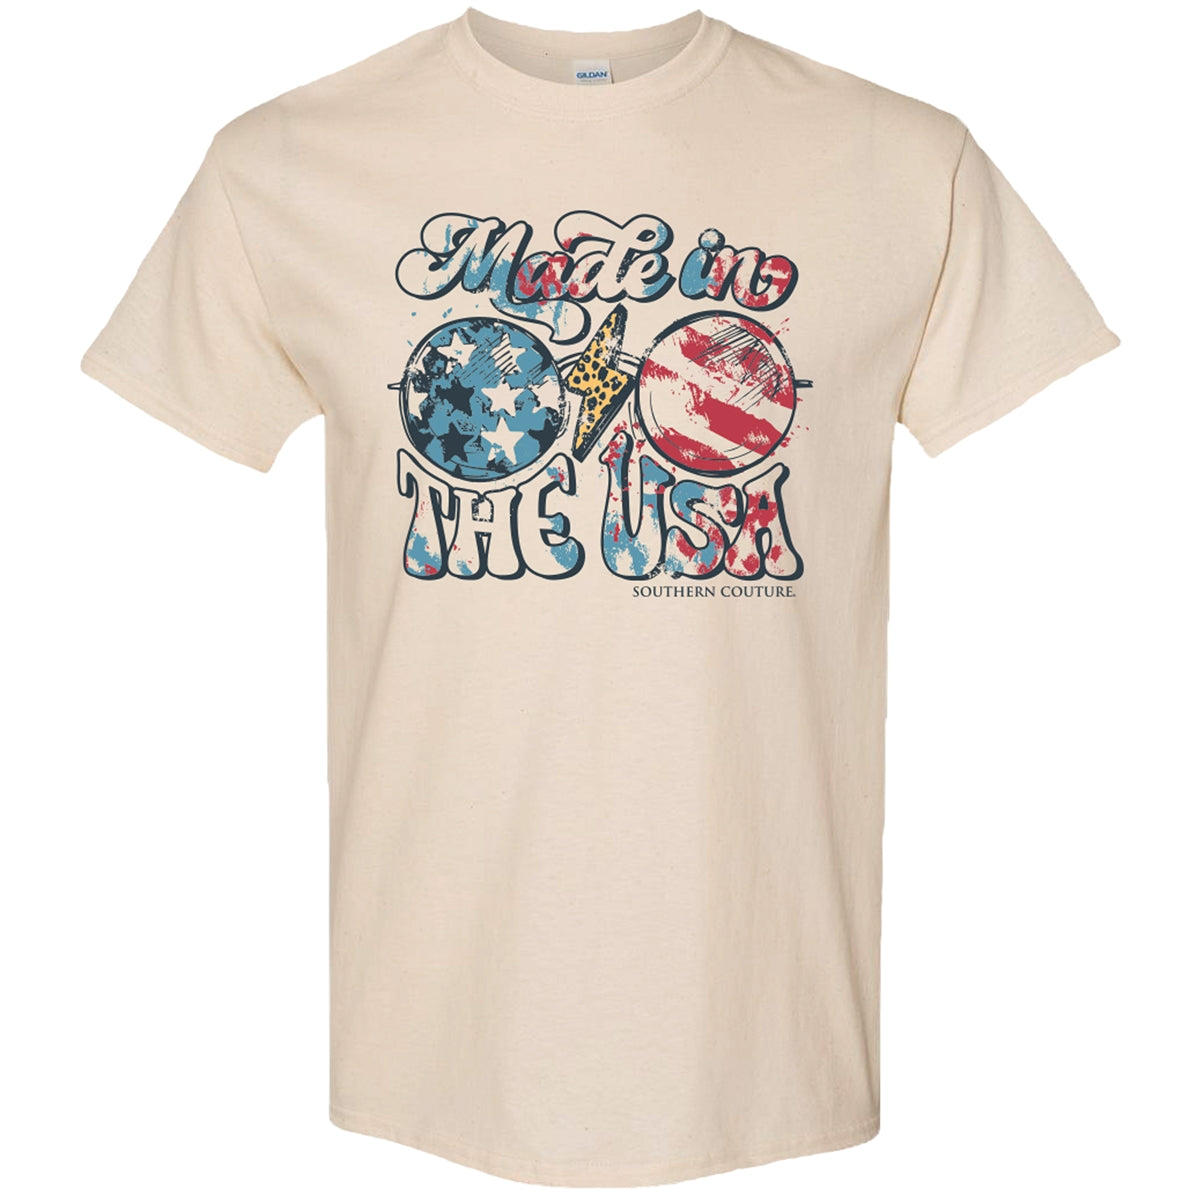 Southern Couture Soft Collection Made in the USA T-Shirt